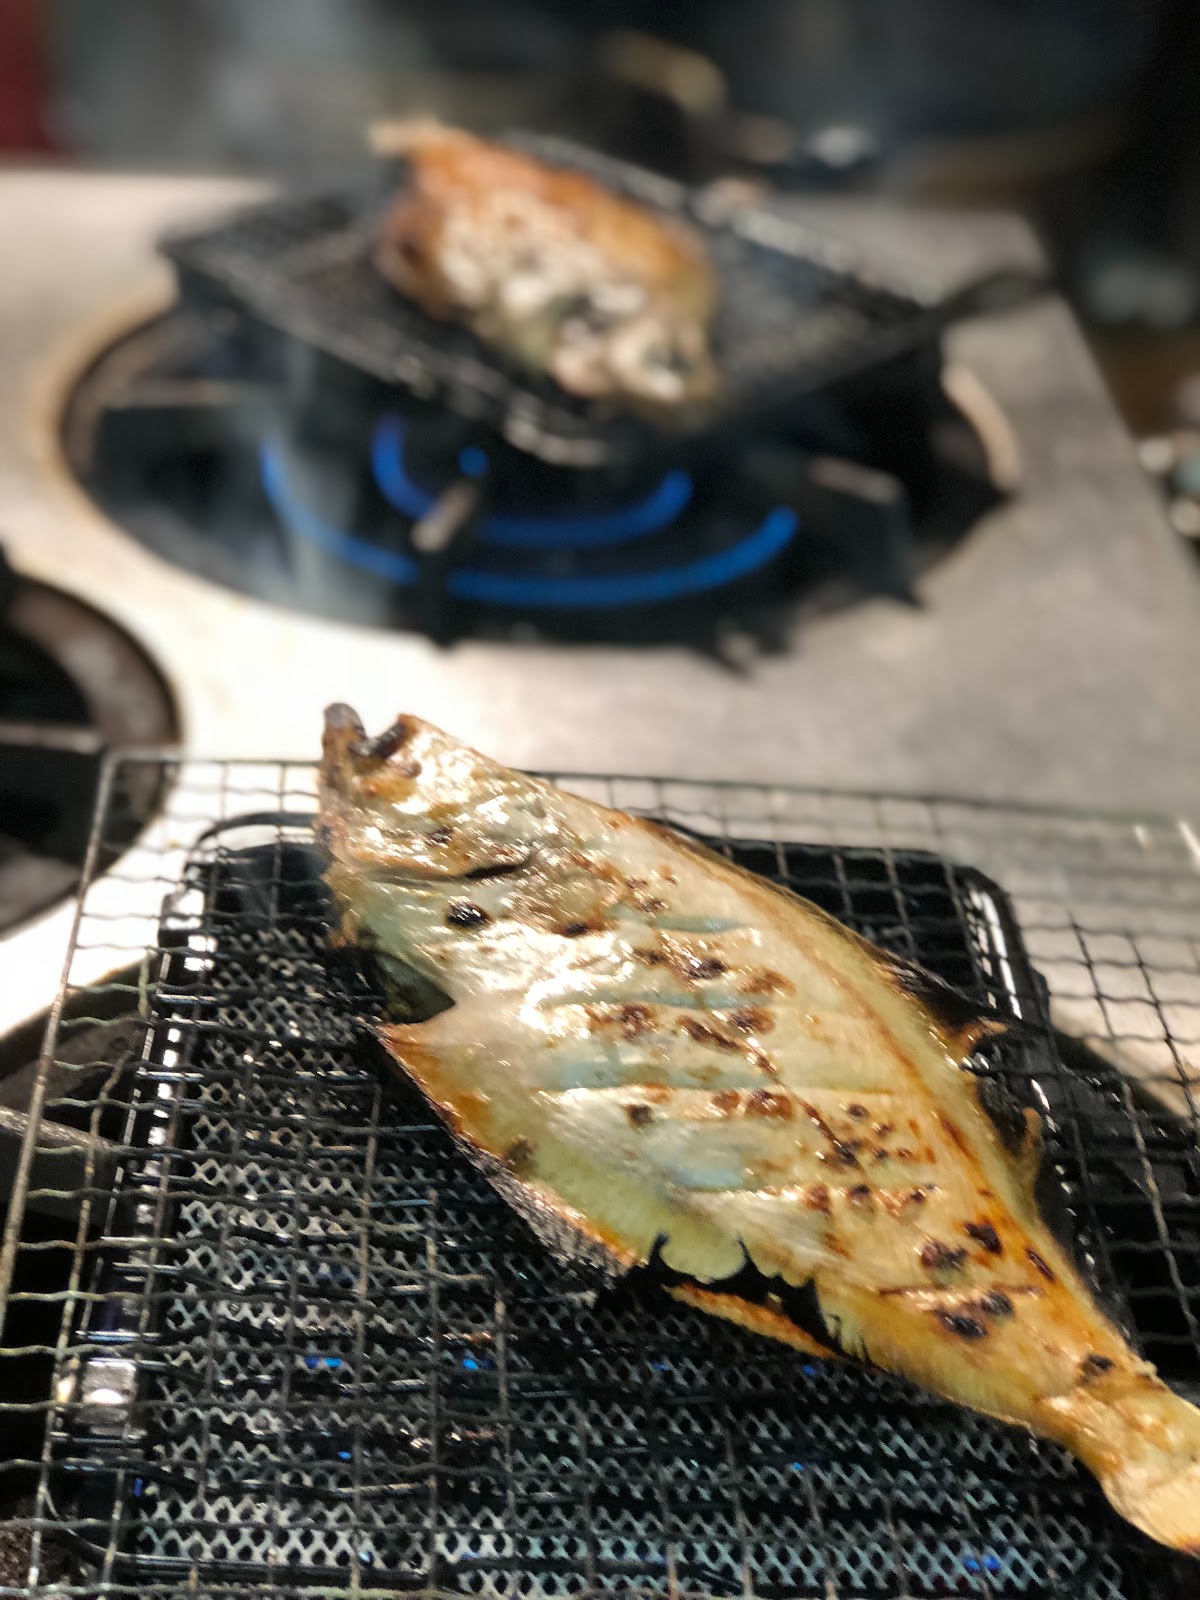 The grilled fish.;